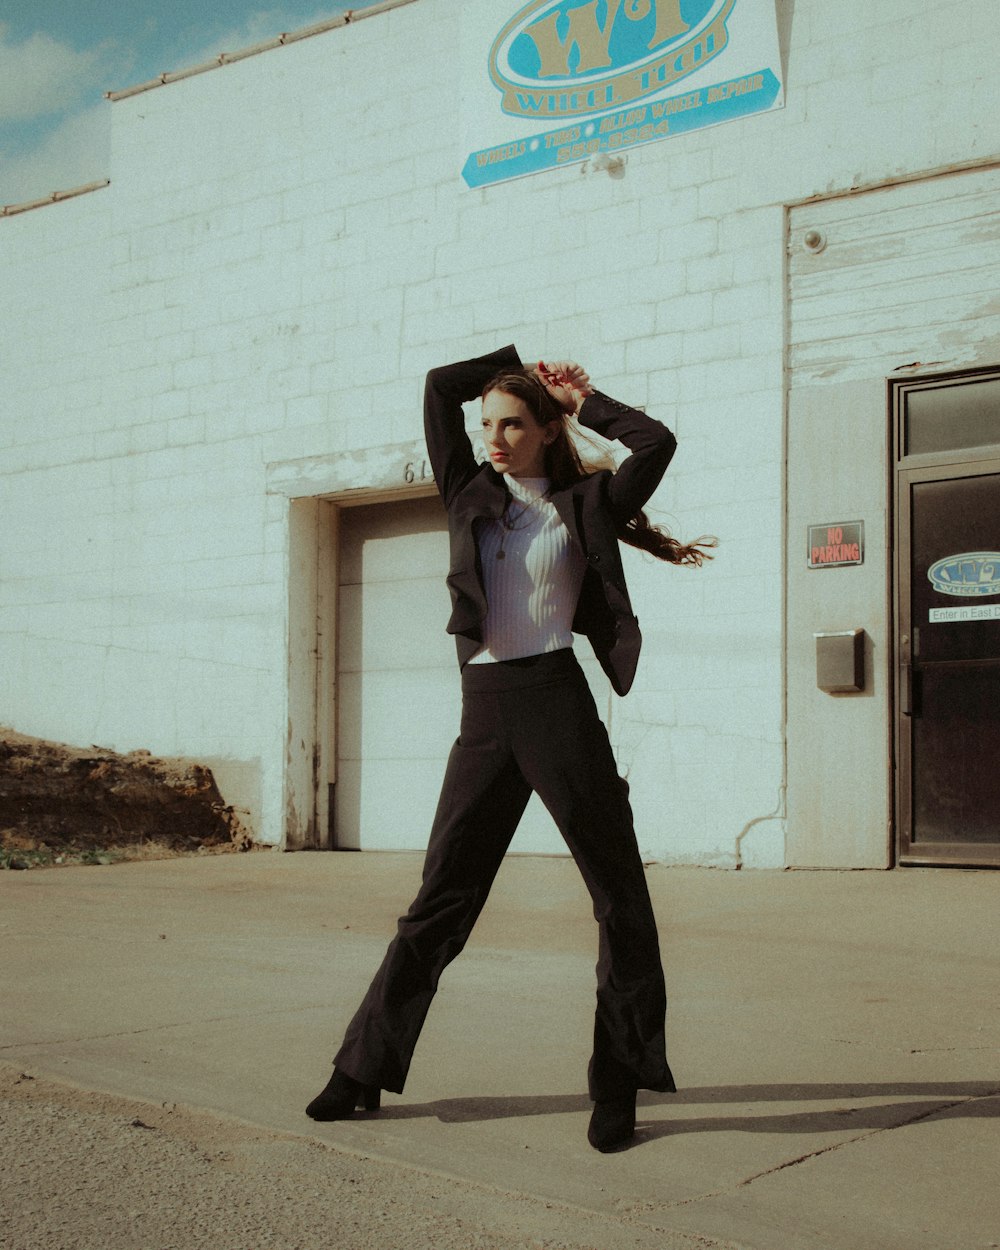 woman in white long sleeve shirt and black pants standing on gray concrete floor